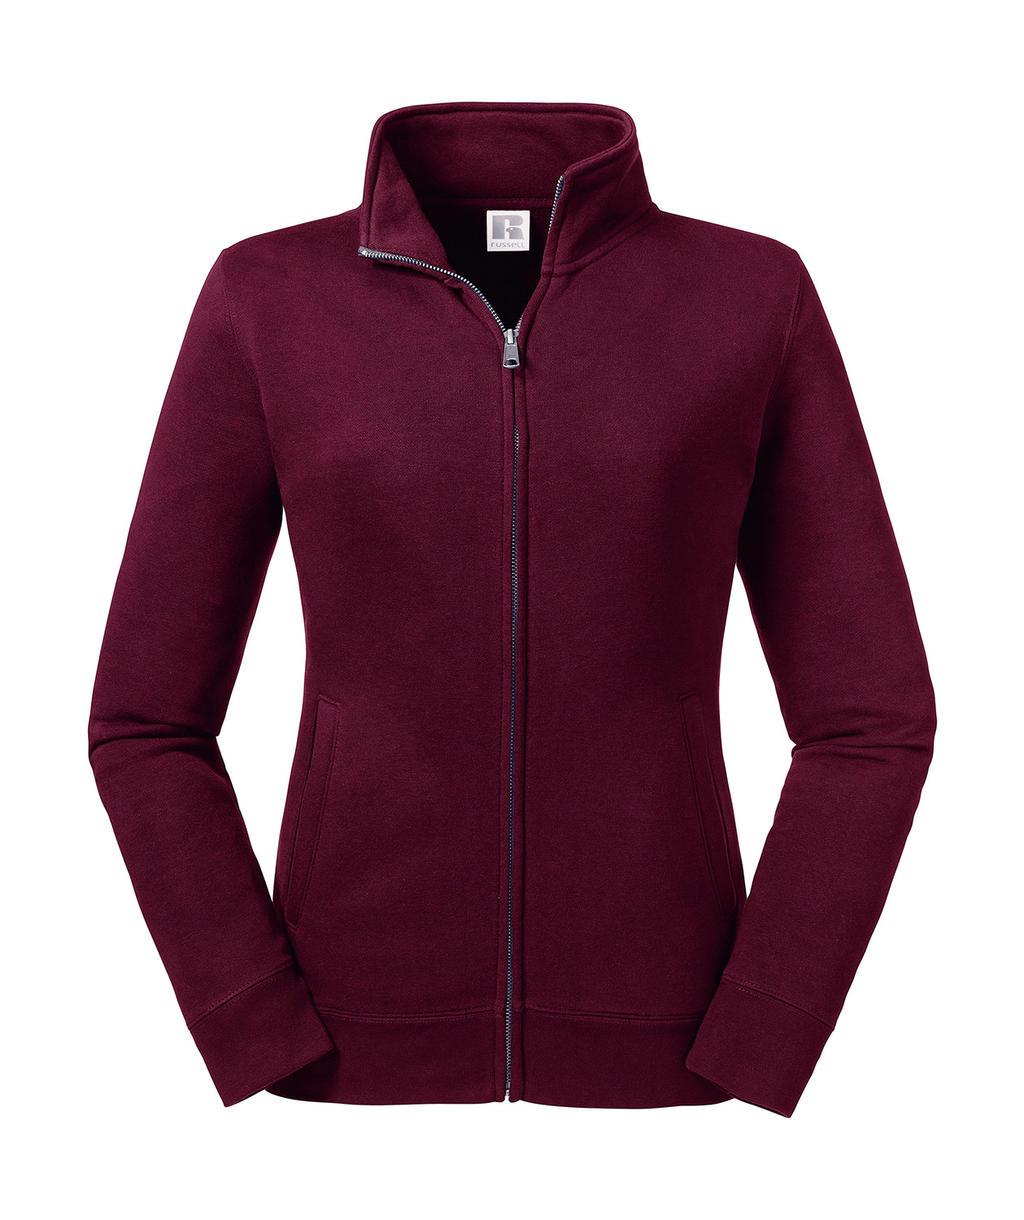  Ladies Authentic Sweat Jacket in Farbe Burgundy